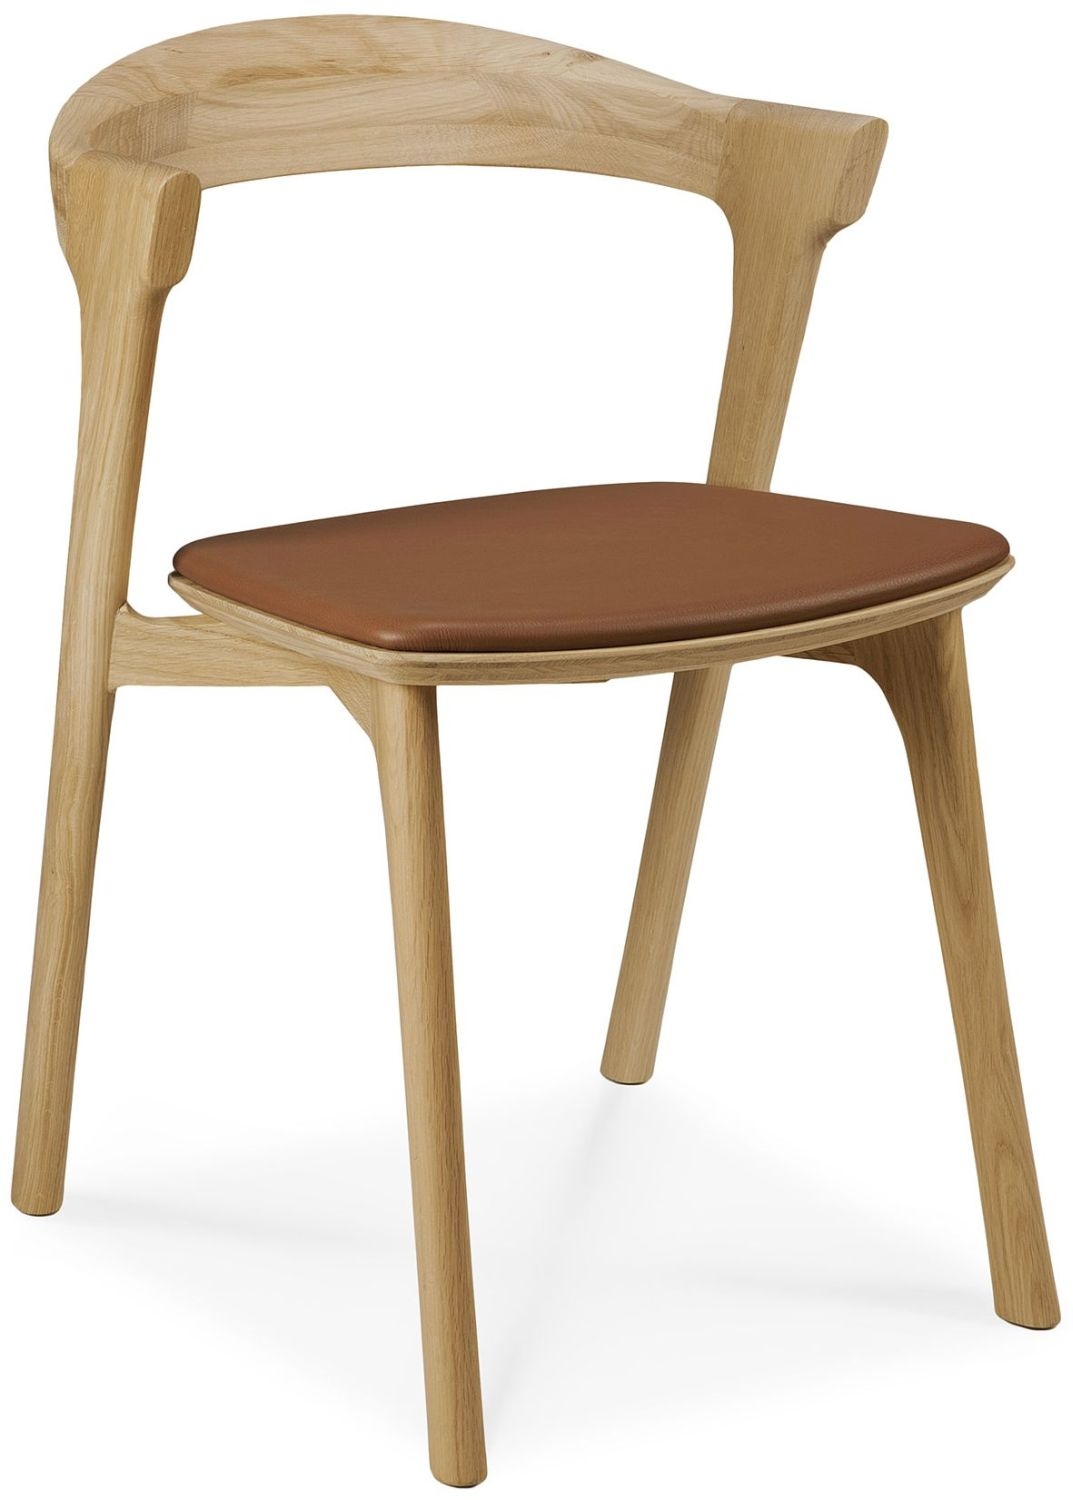 Ethnicraft Oak Bok Dining Chair With Cognac Leather Seat Sold In Pairs